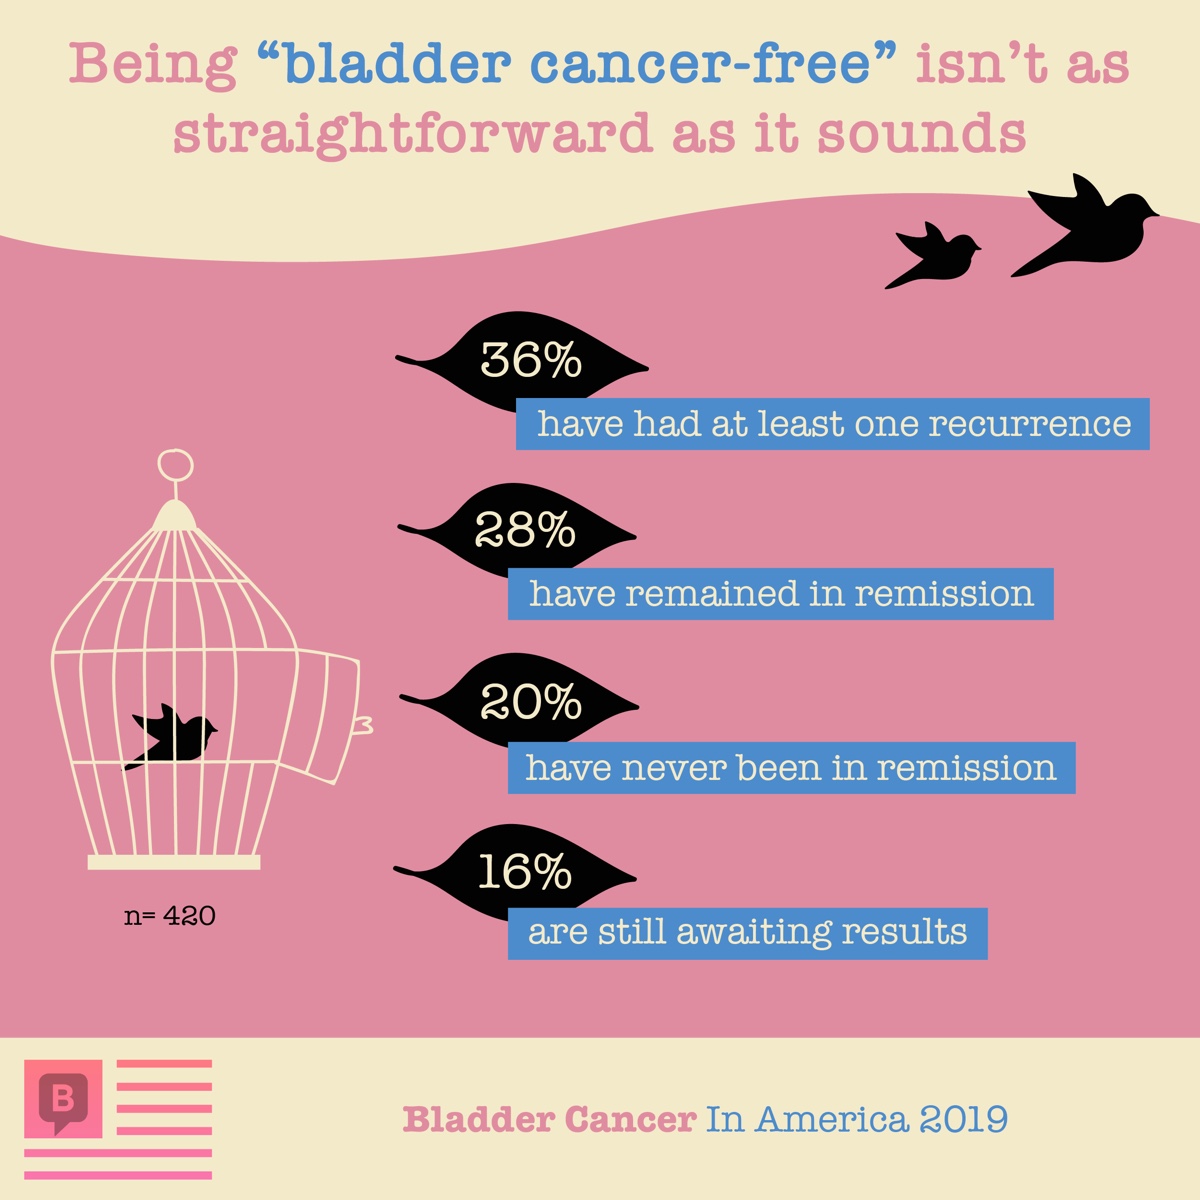 Many people don't stay bladder cancer-free with 36% having had at least one recurrence